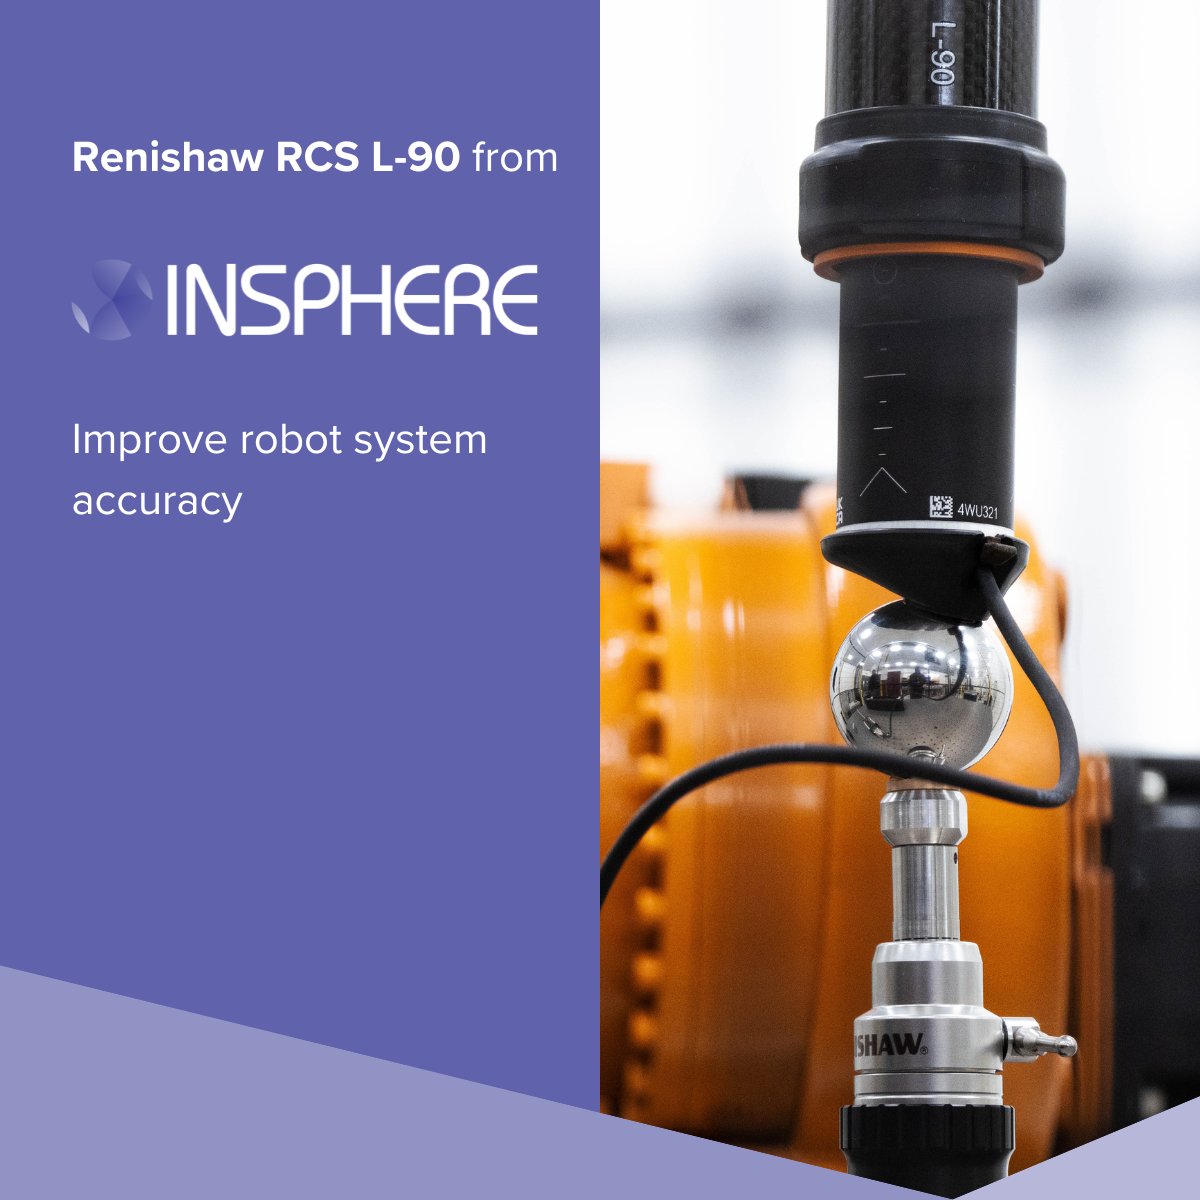 The RCS L-90, developed by Renishaw, is a tool maintenance engineers can use to run robot health-check tests, to assist in the installation and calibration of robot systems. Available as part of INSPHERE's range to improve industrial robot performance. insphereltd.com/rcs-l-90/